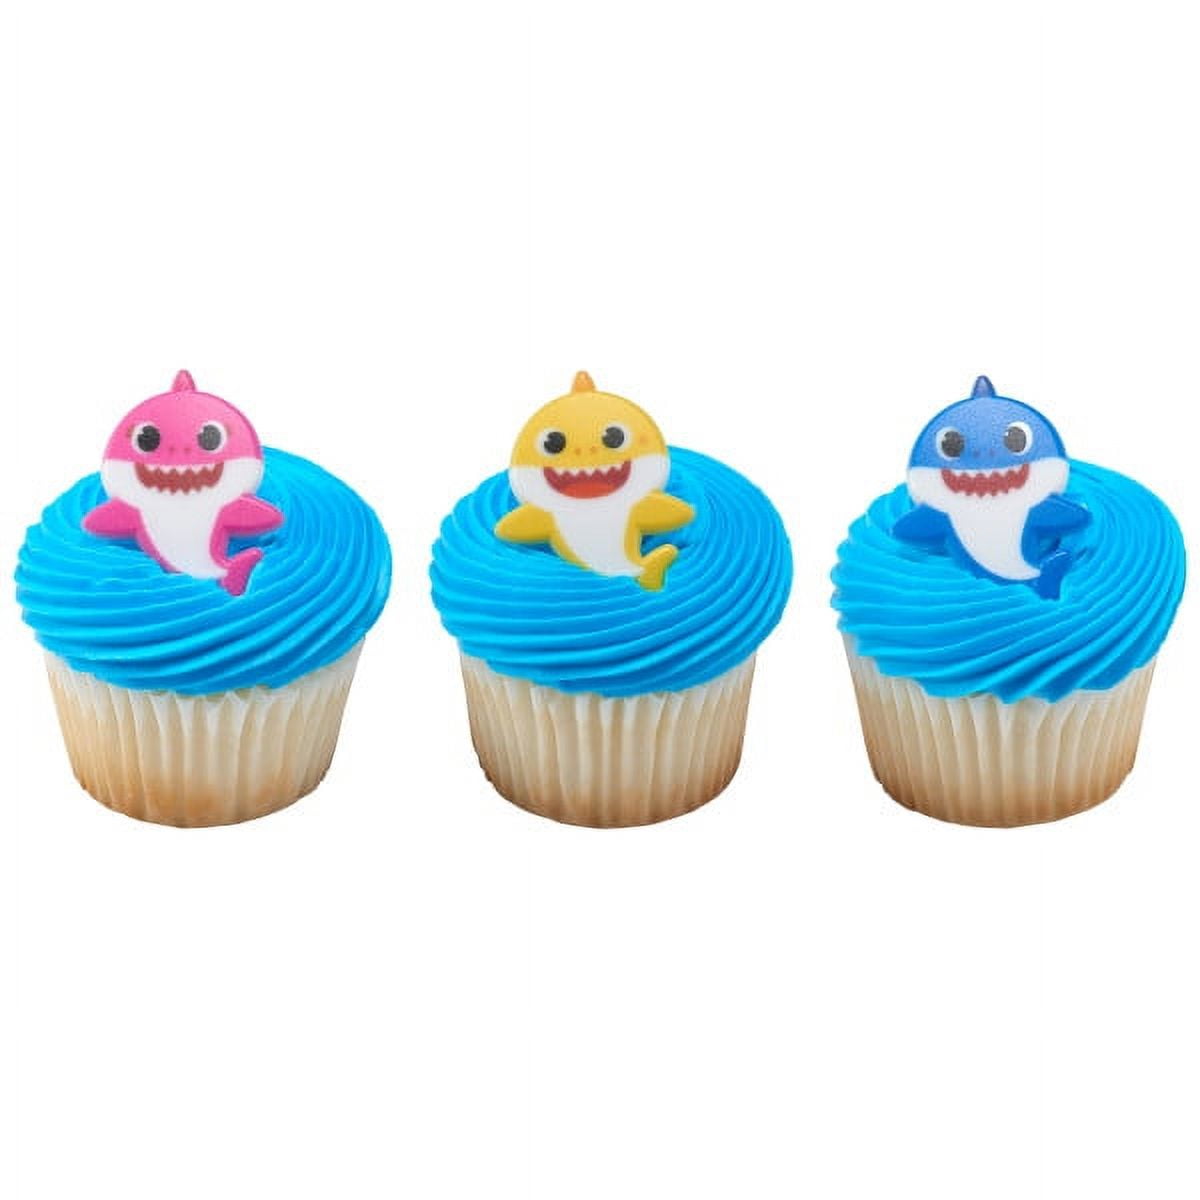 24 Baby Shark Mommy, Daddy, and Baby Cupcake Rings Cake Decoration